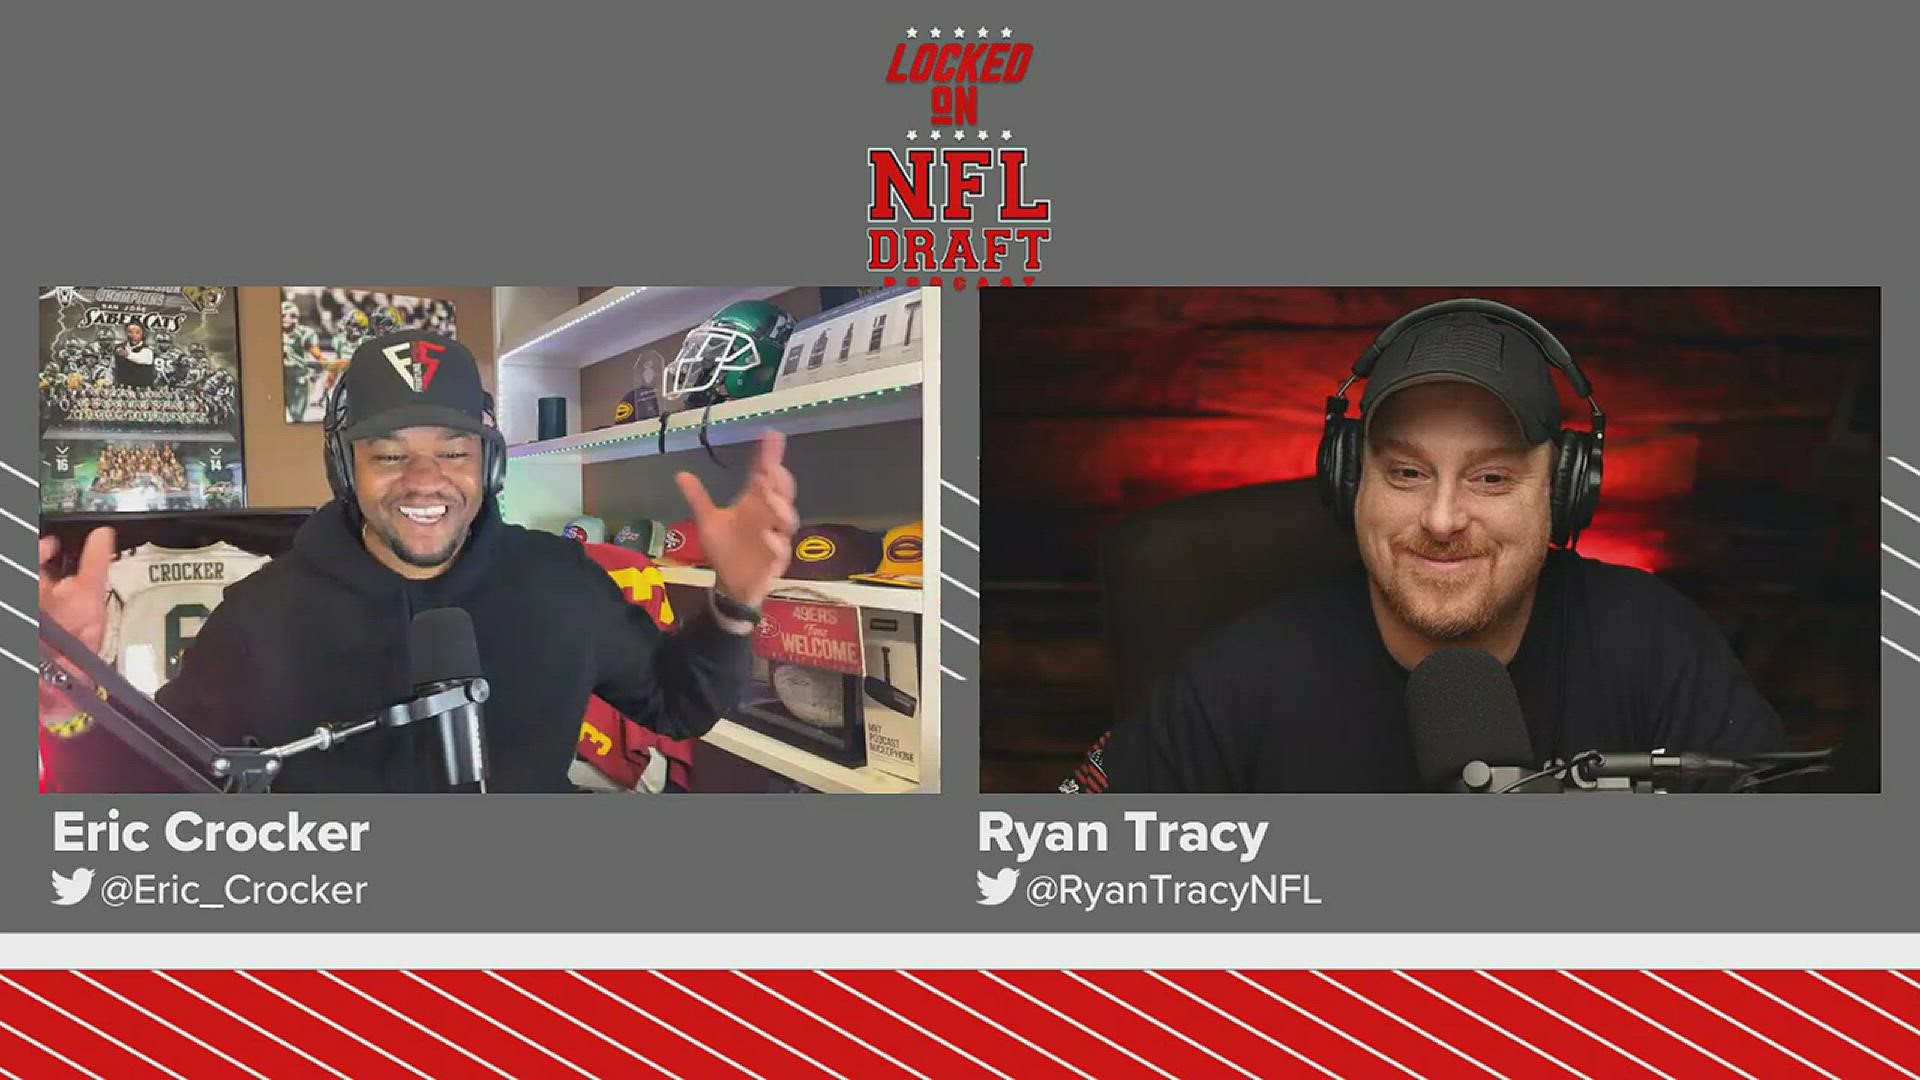 It's Mock Draft Monday on the Locked On NFL Draft podcast. Eric Crocker goes through his latest first round mock draft as he and Ryan Tracy analyze the picks.